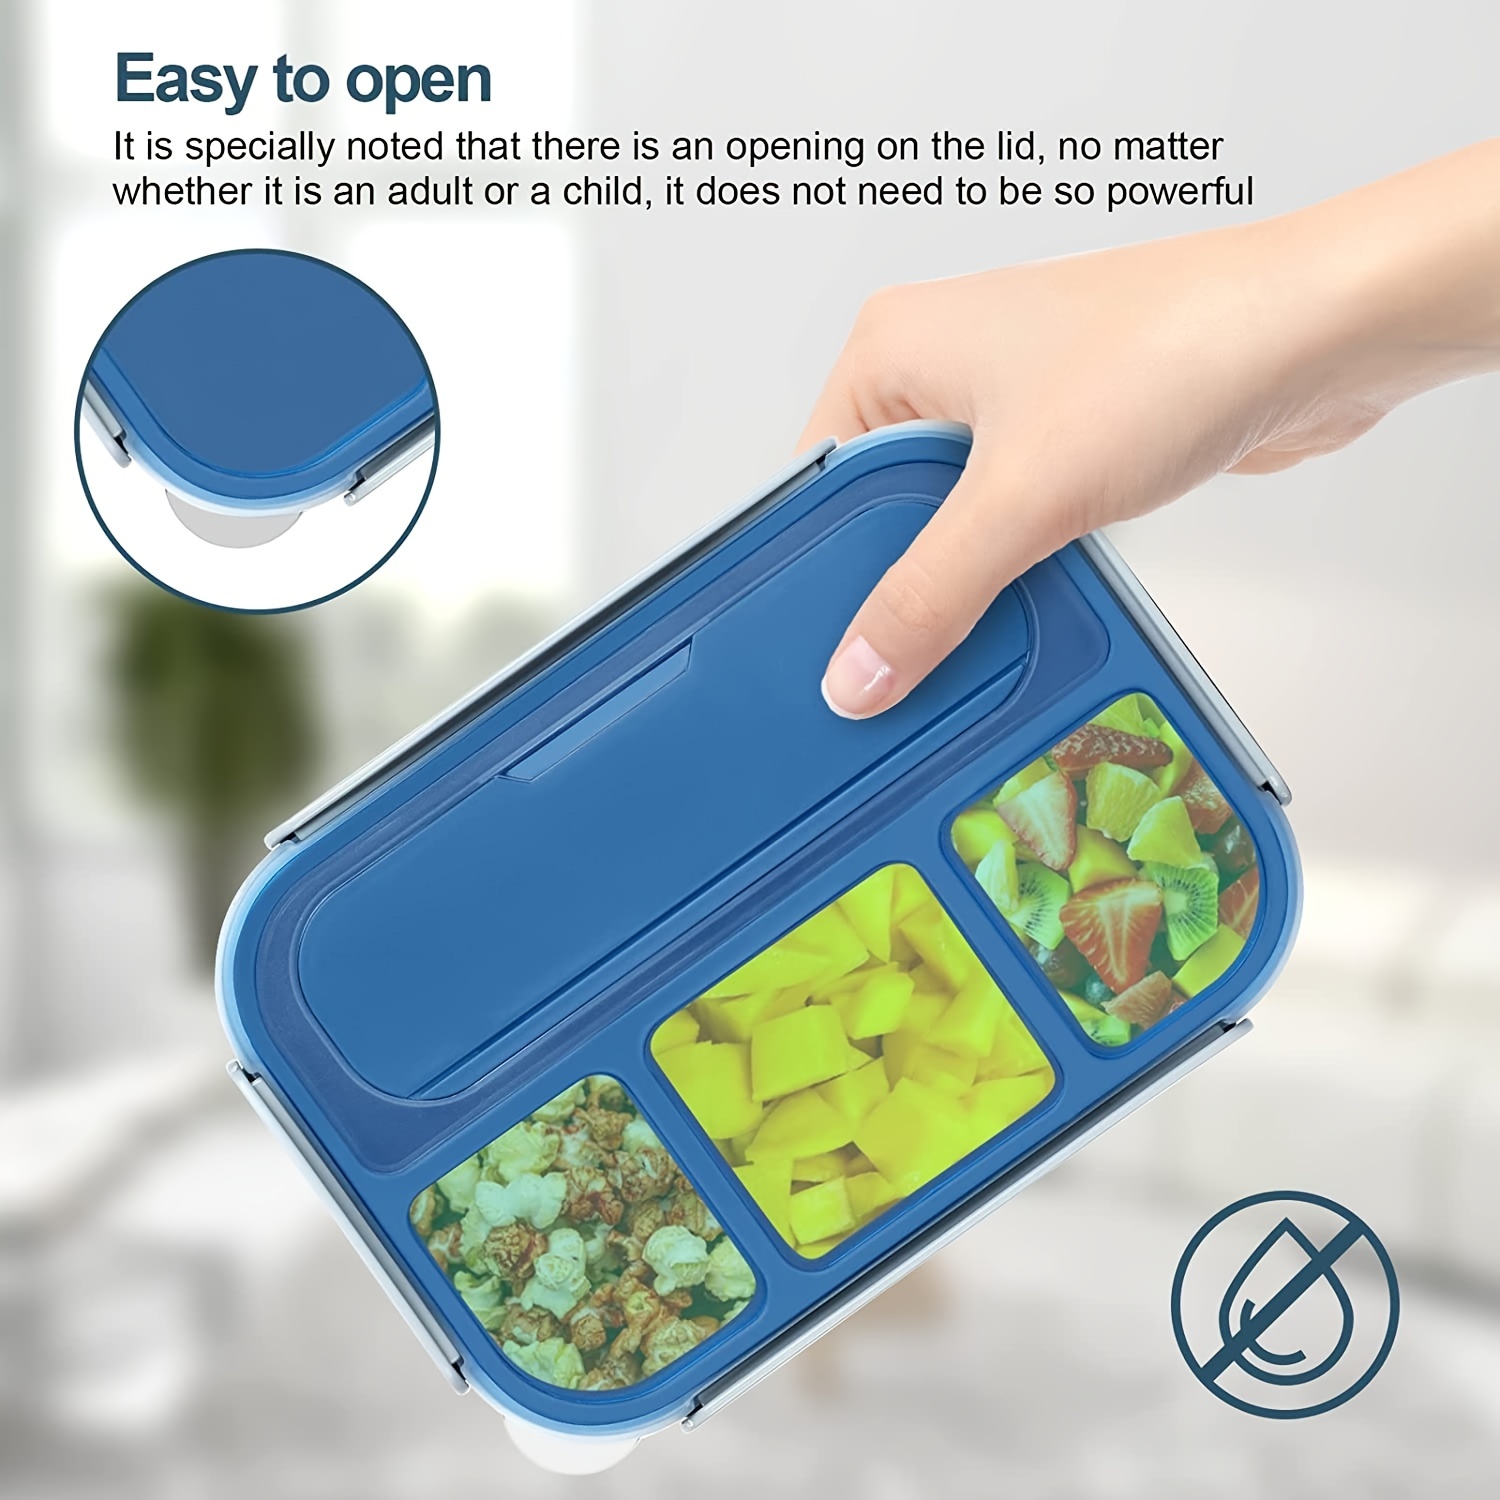 Launch of Plastic-Free Insulated Food Canister